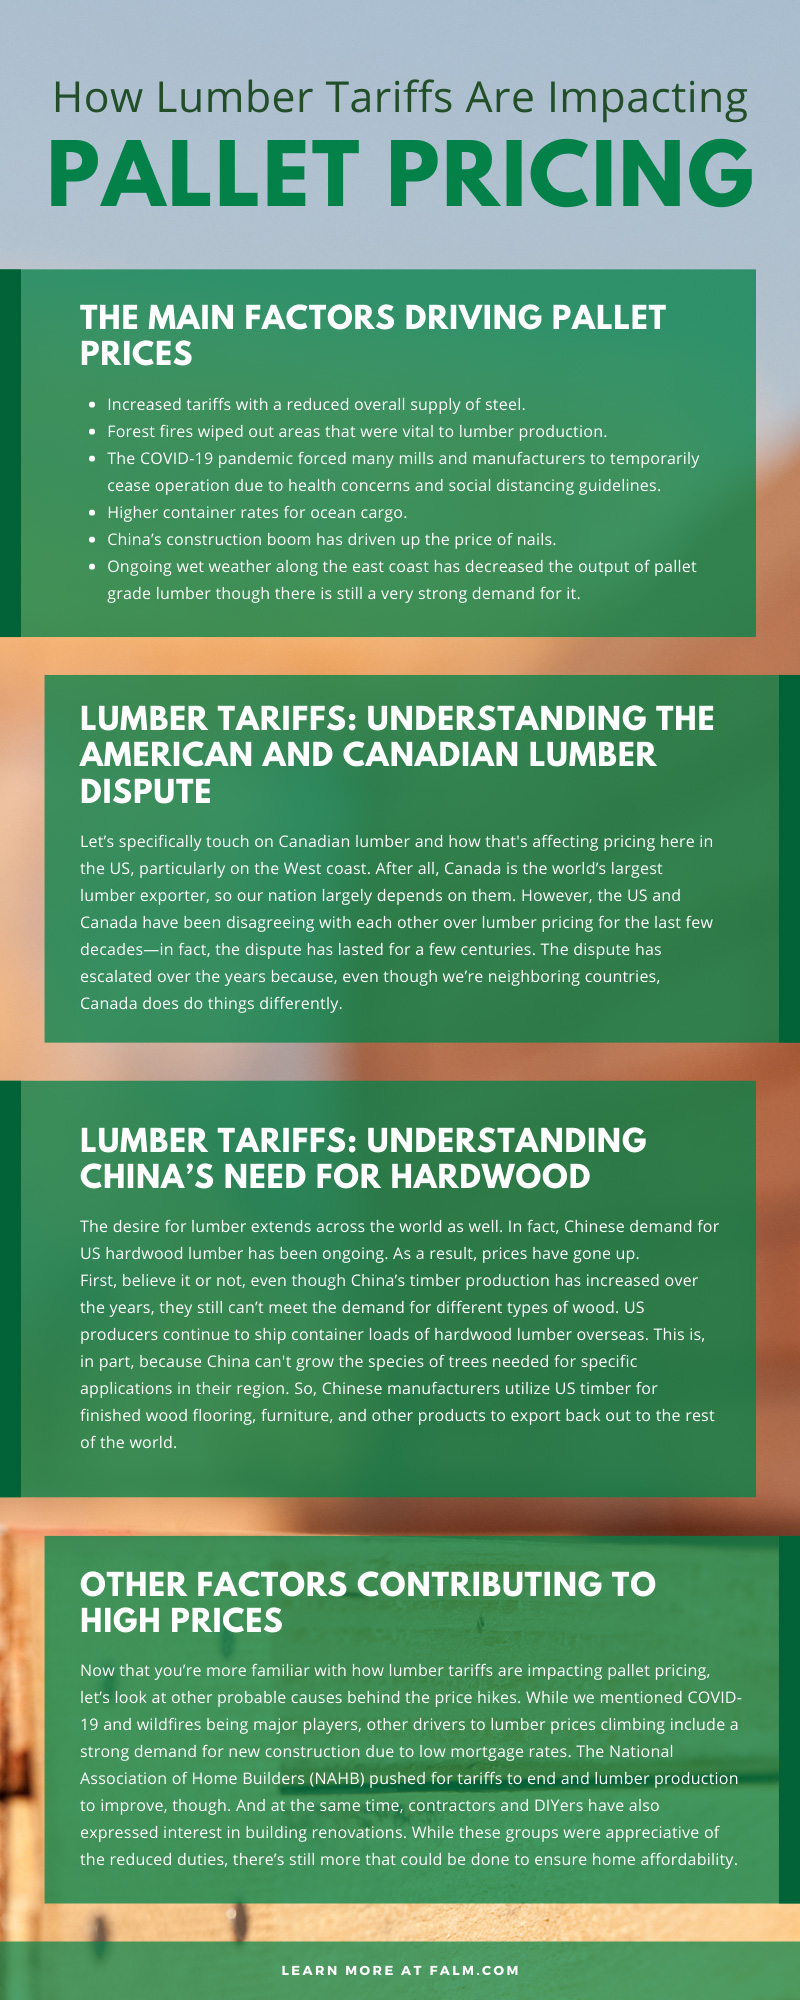 How Lumber Tariffs Are Impacting Pallet Pricing